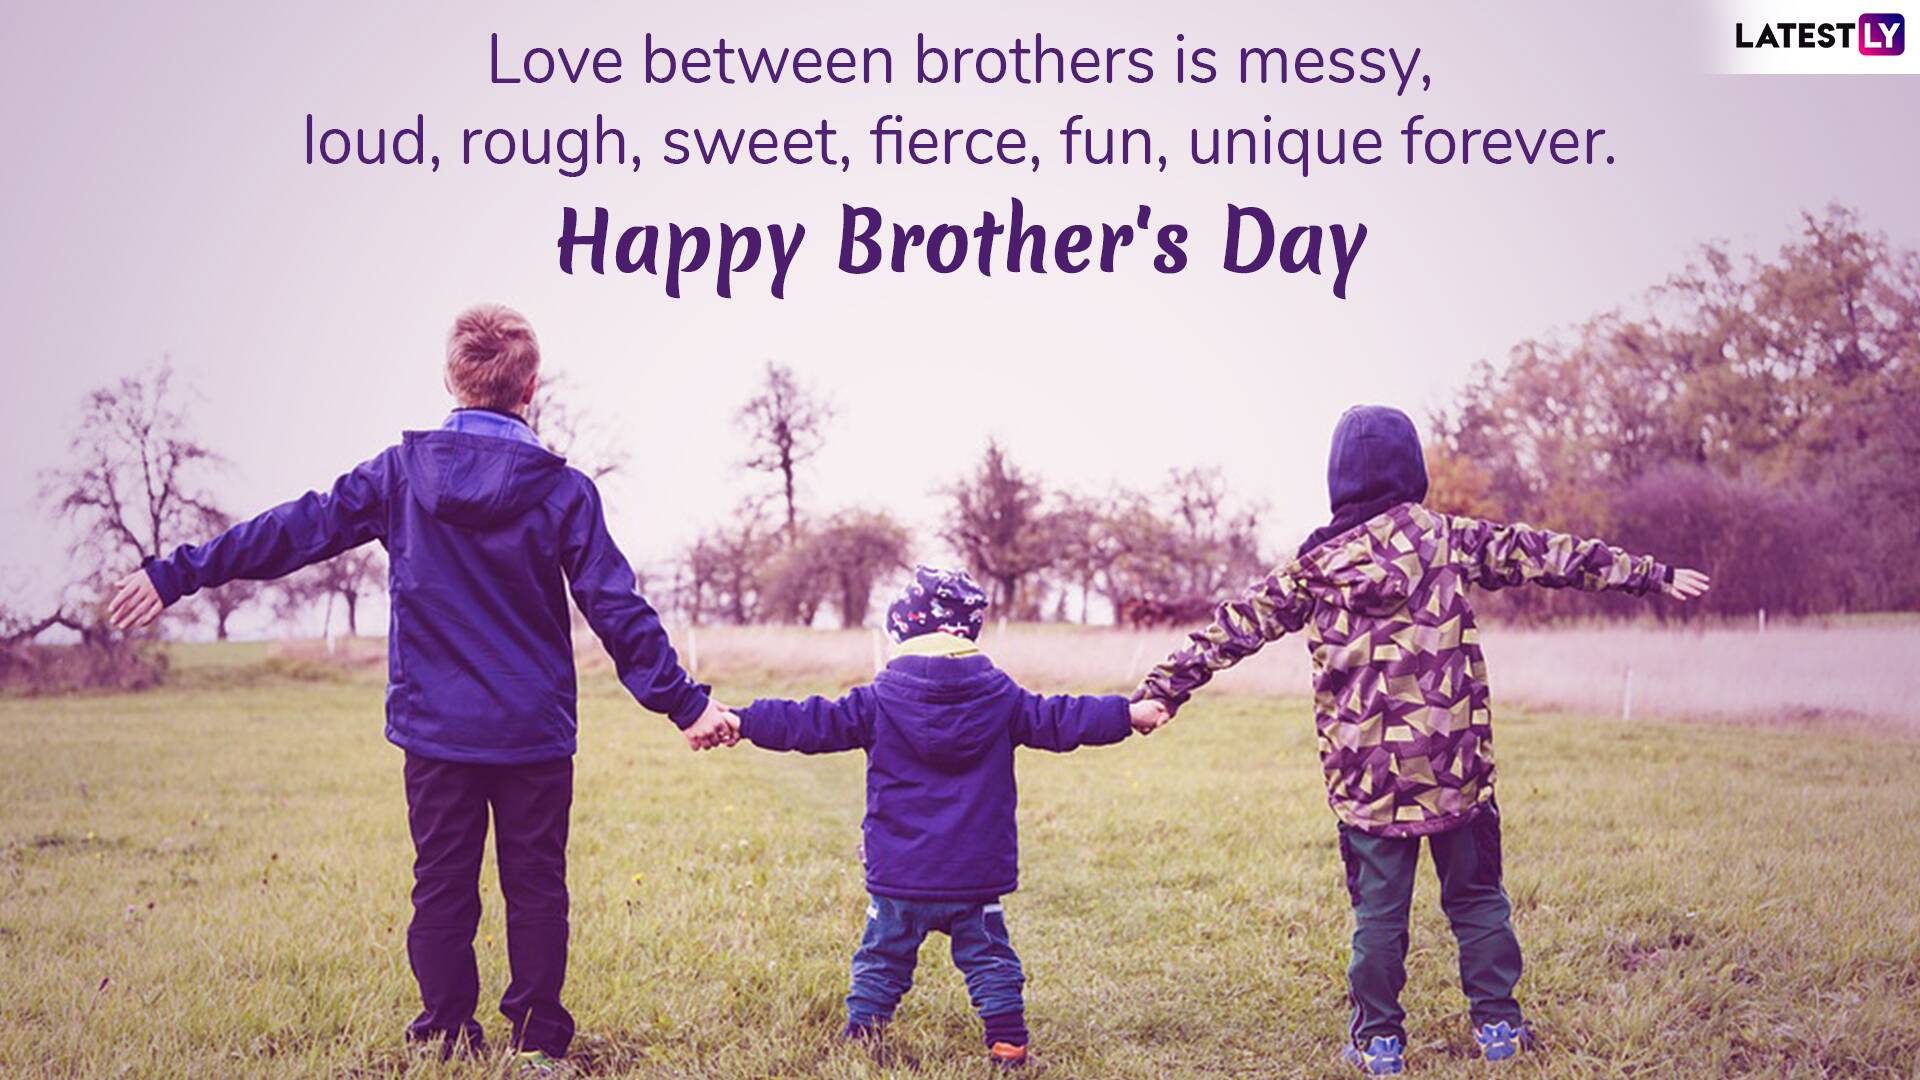 Brothers Day 2019 In India / .as brothers day in india?, why do we